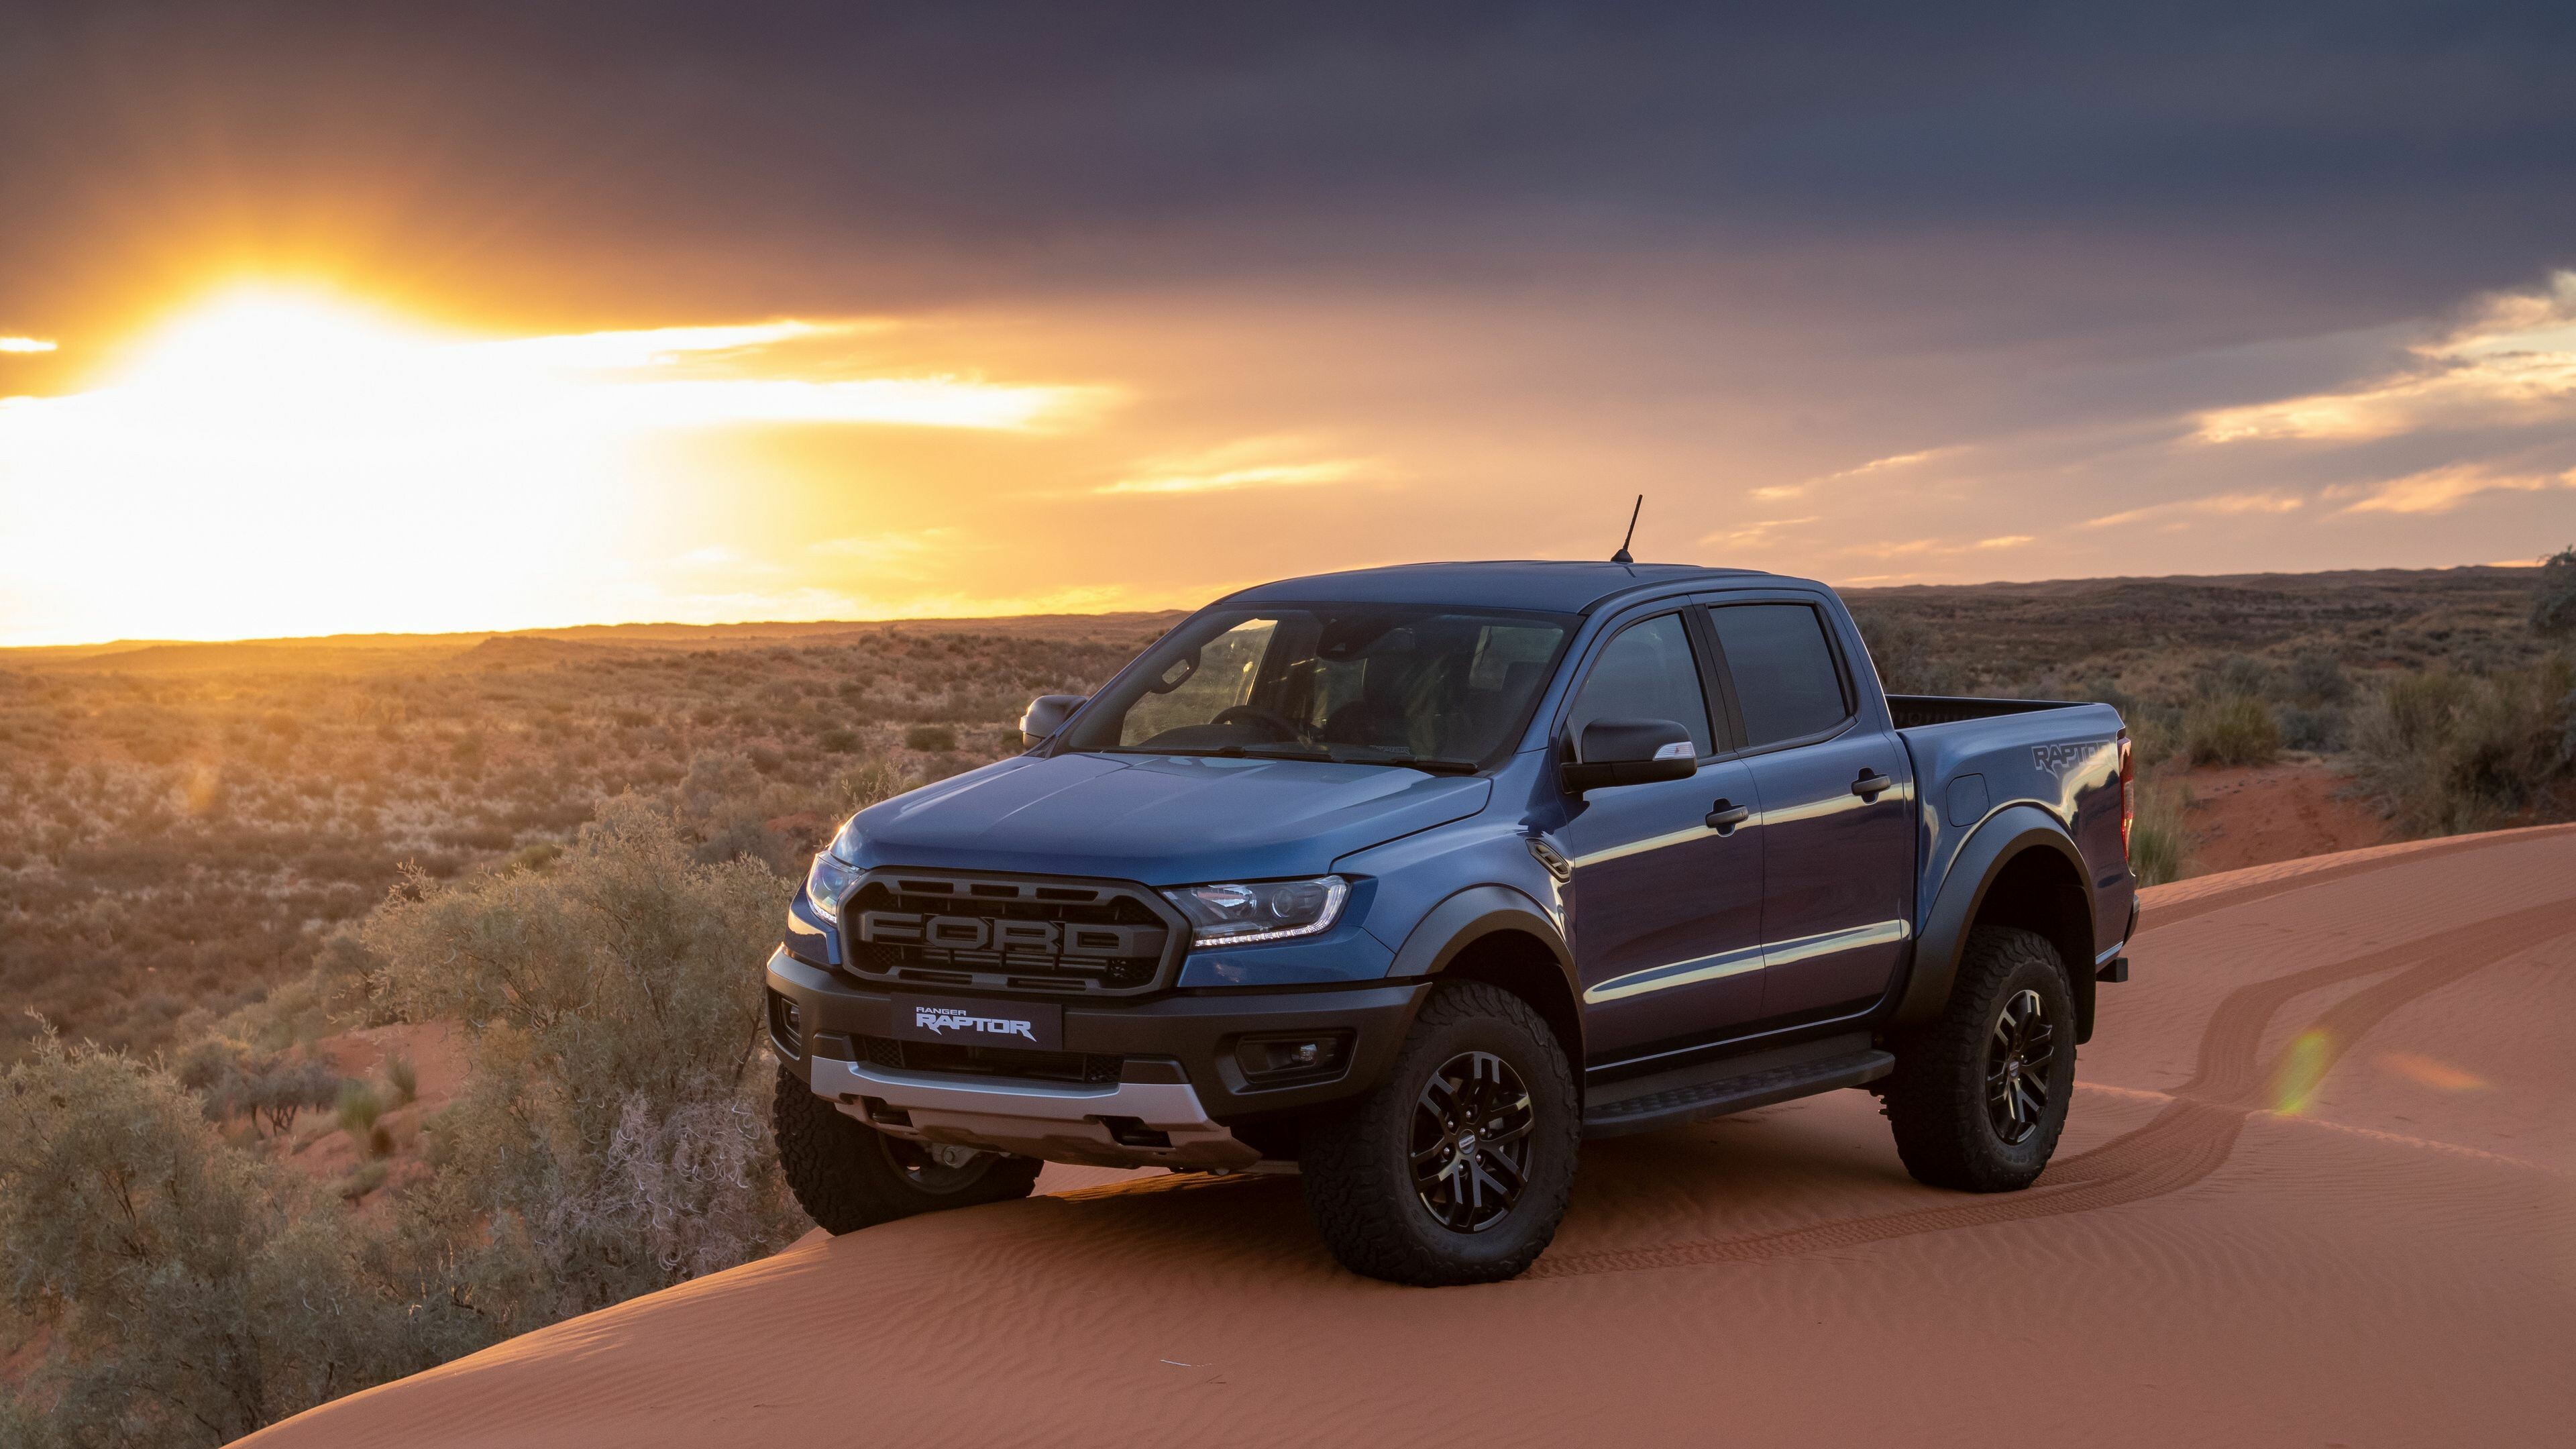 Ford: Raptor, Designated as the highest-performance version of the F-150, Ranger and Bronco. 3840x2160 4K Background.